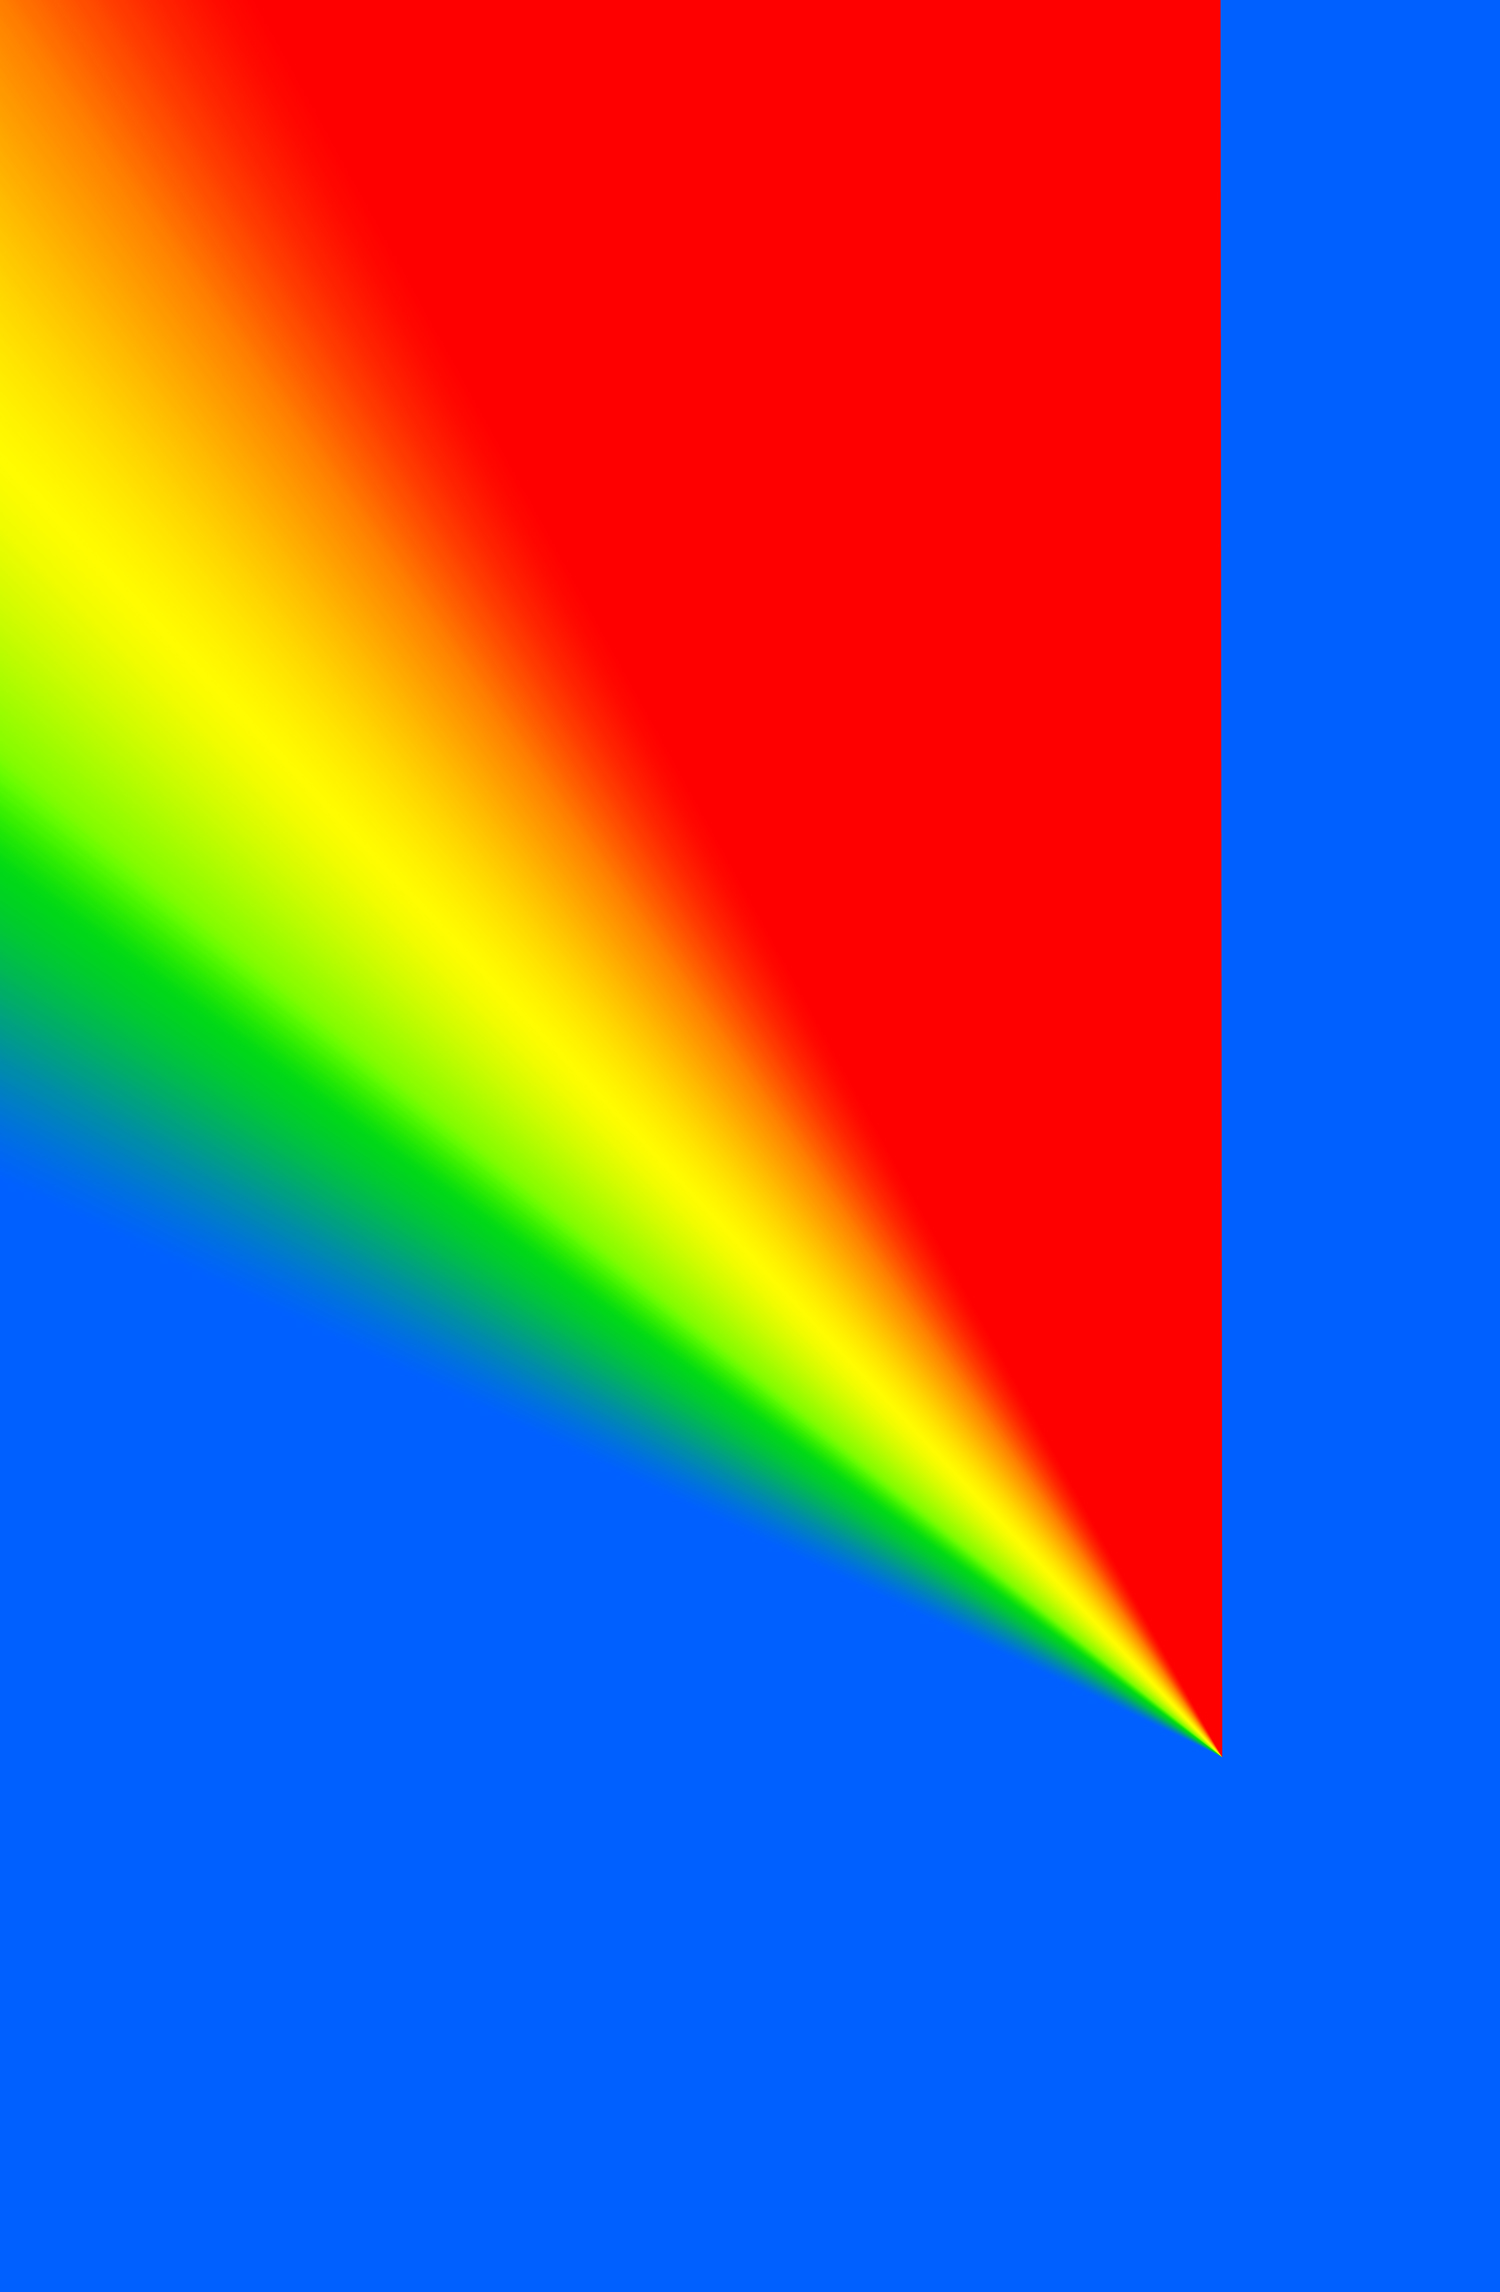 Cory arcangel   photoshop cs  110 by 72 inches  300 dpi  rgb  square pixels  default gradient    russell   s rainbow     tur